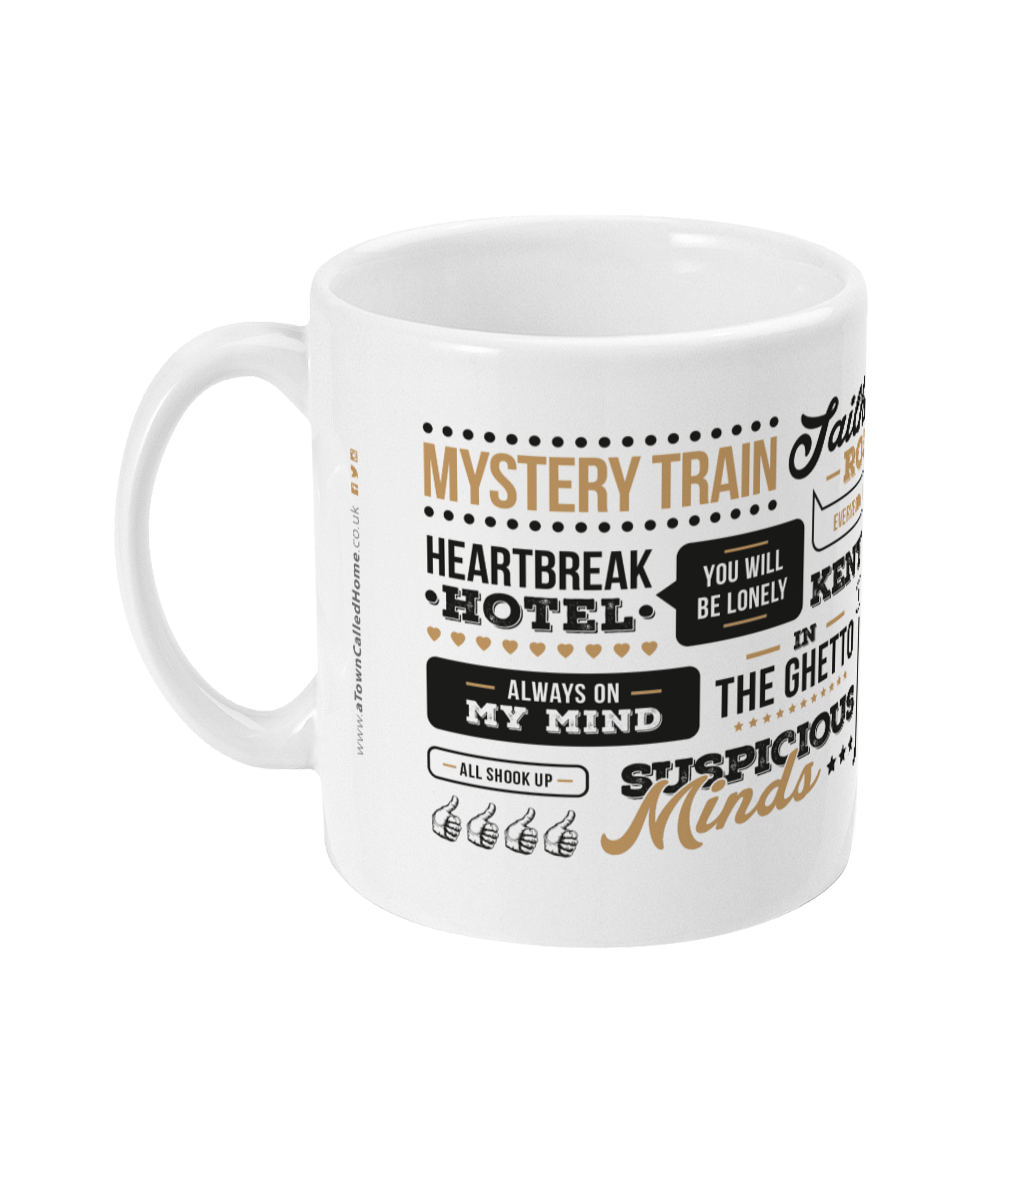 A unique mug perfect for Elvis fans.  Features illustration of 'The King' and includes the names of some of the most popular lines from his most loved songs from over the years,  including 'suspicious minds', 'love me tender' and 'jailhouse rock'. 